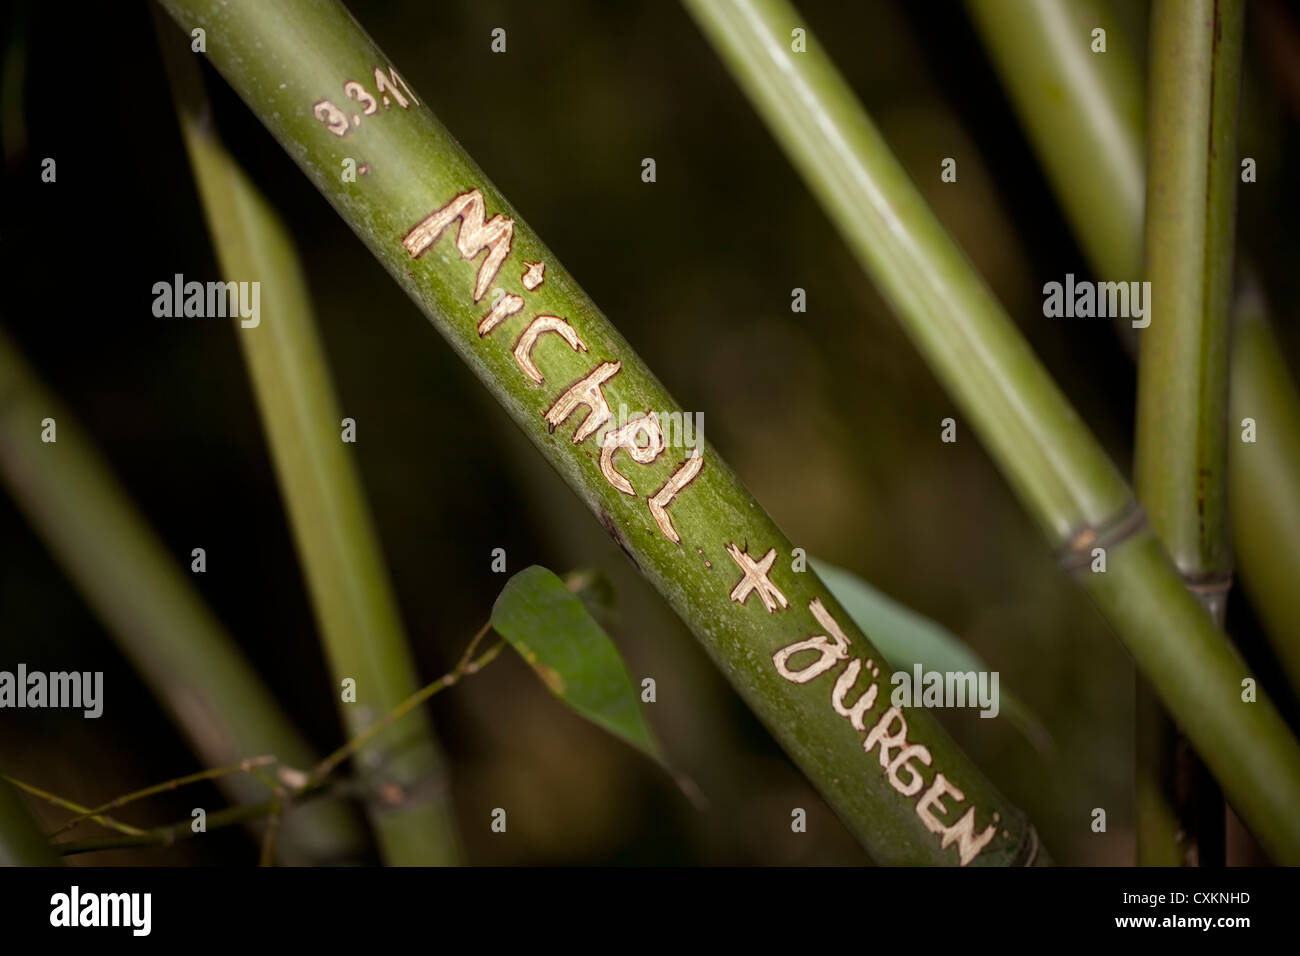 Vow of love carved in bamboo, Michel and Juergen, Japanese arrow bamboo (Pseudomonas japonica), Stock Photo